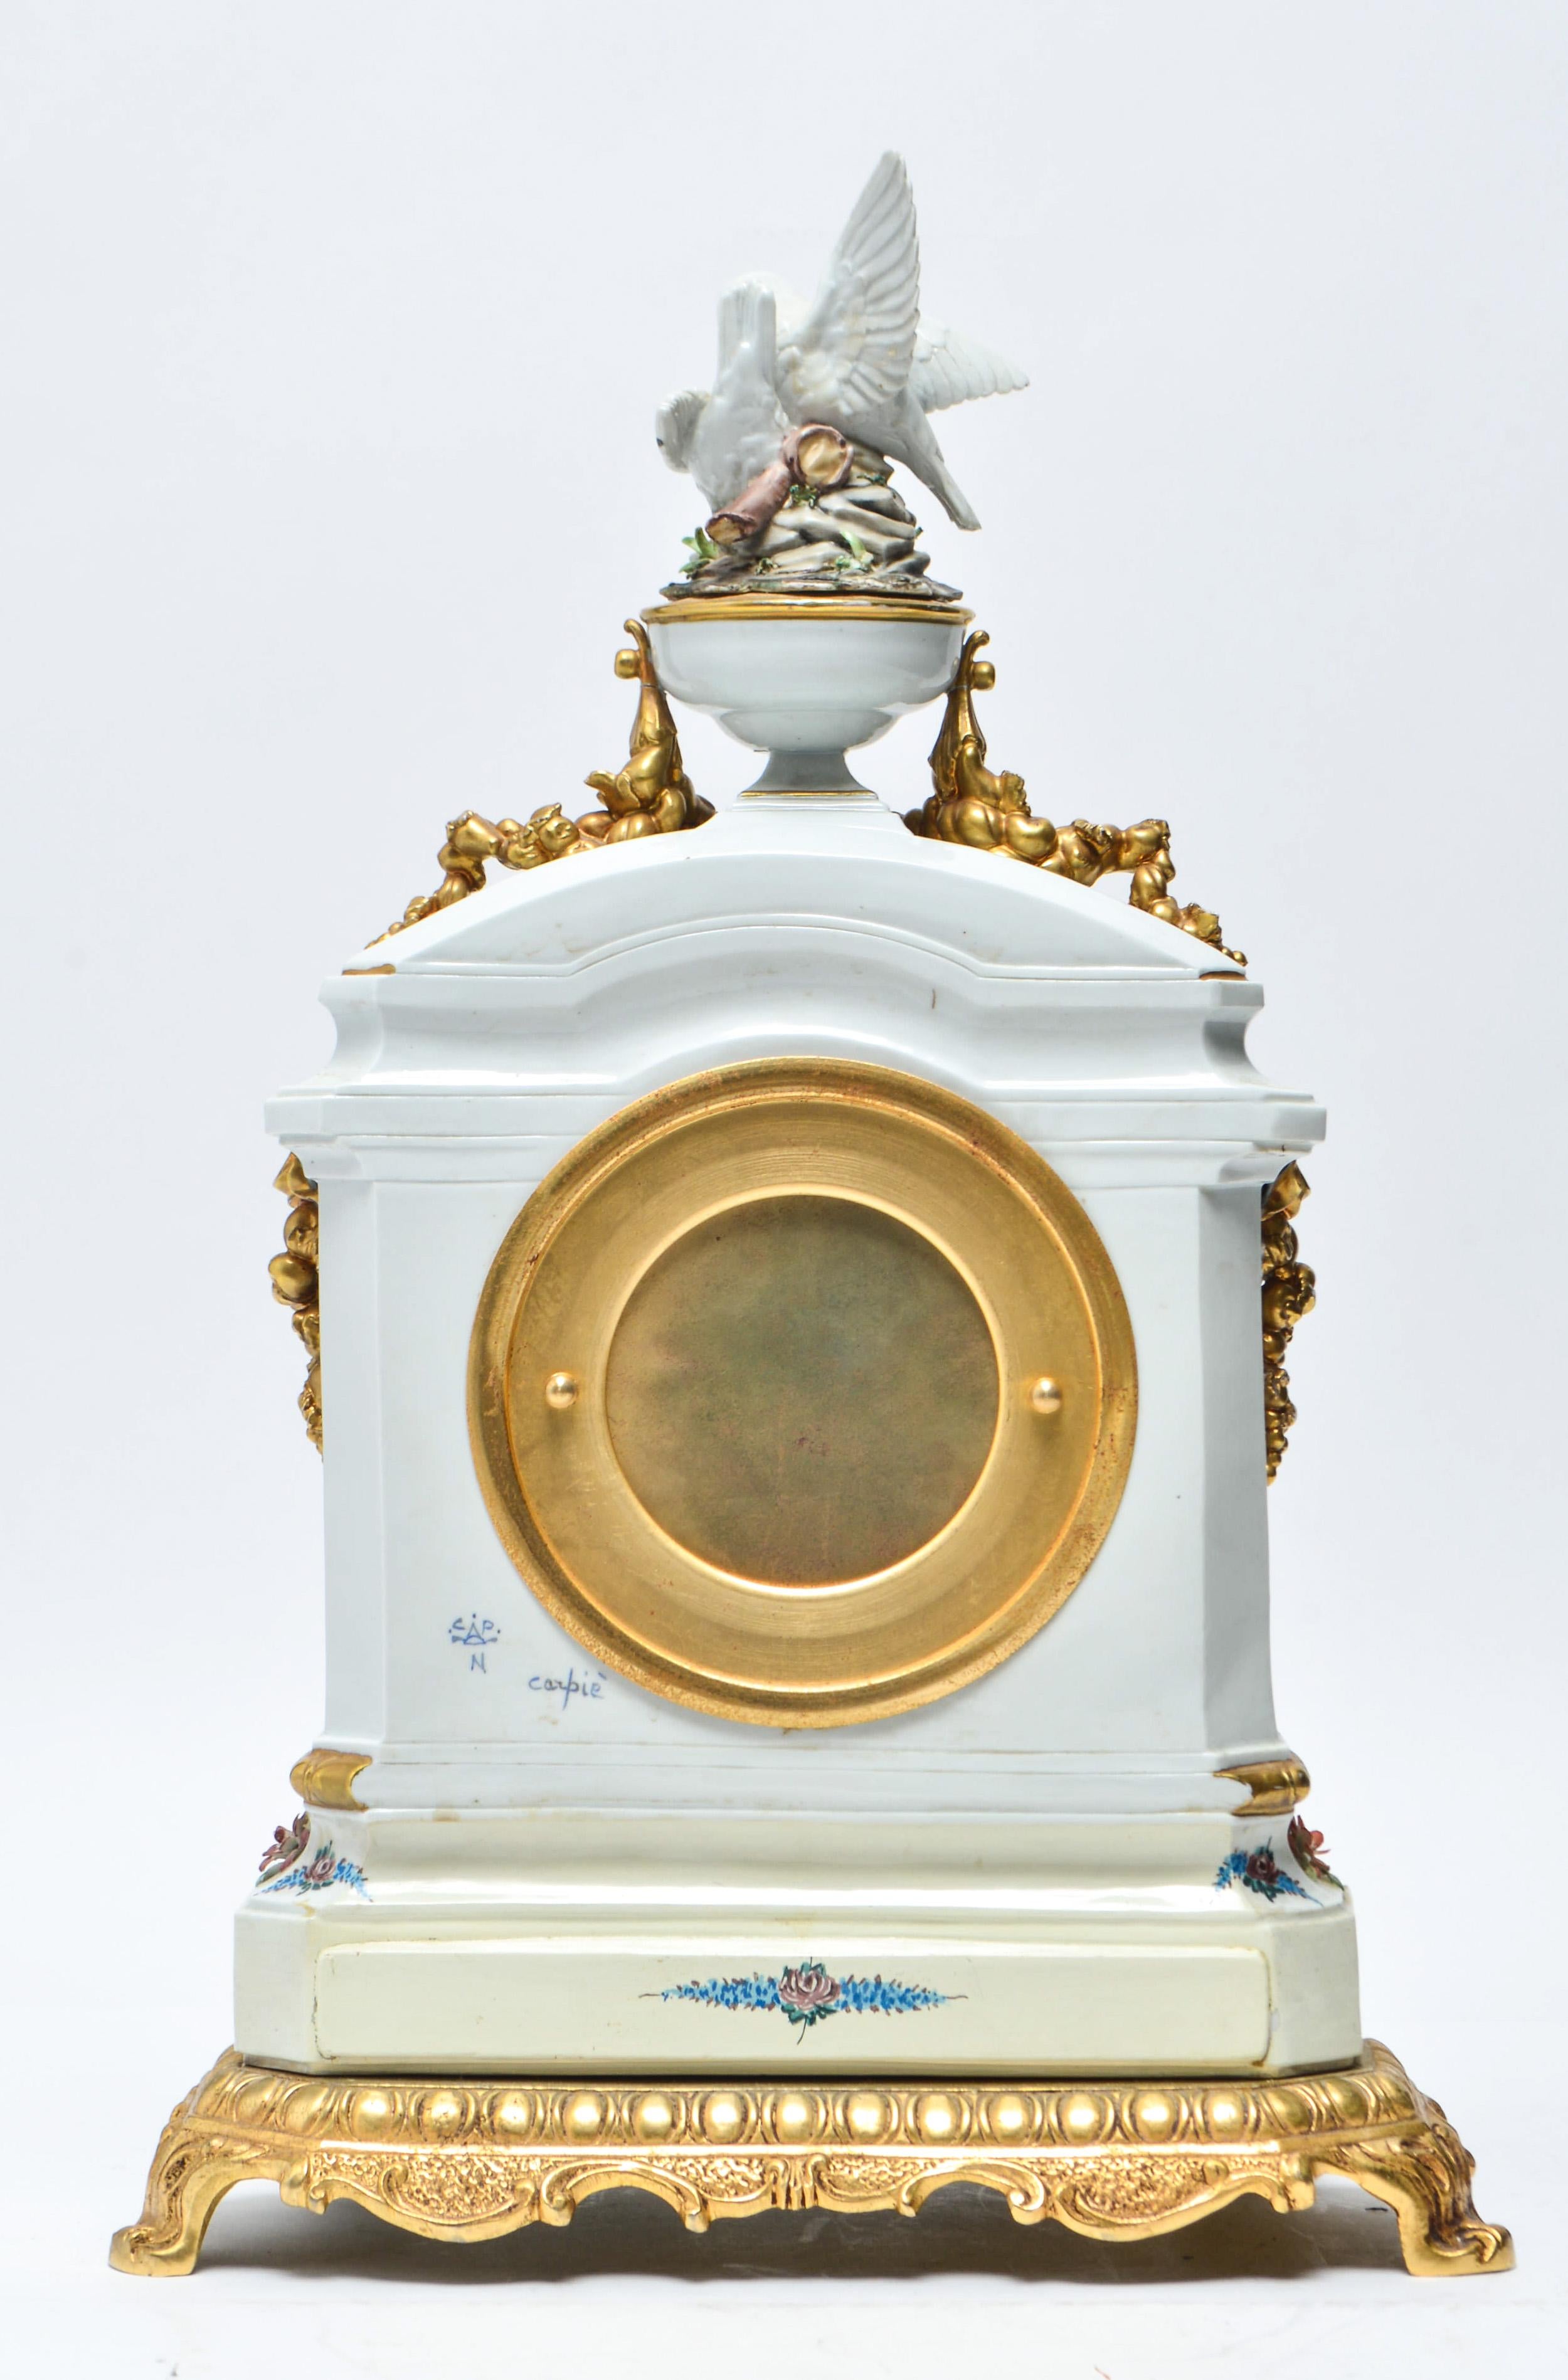 Hand-Painted French Carpie Hand Painted Porcelain Mantel Clock